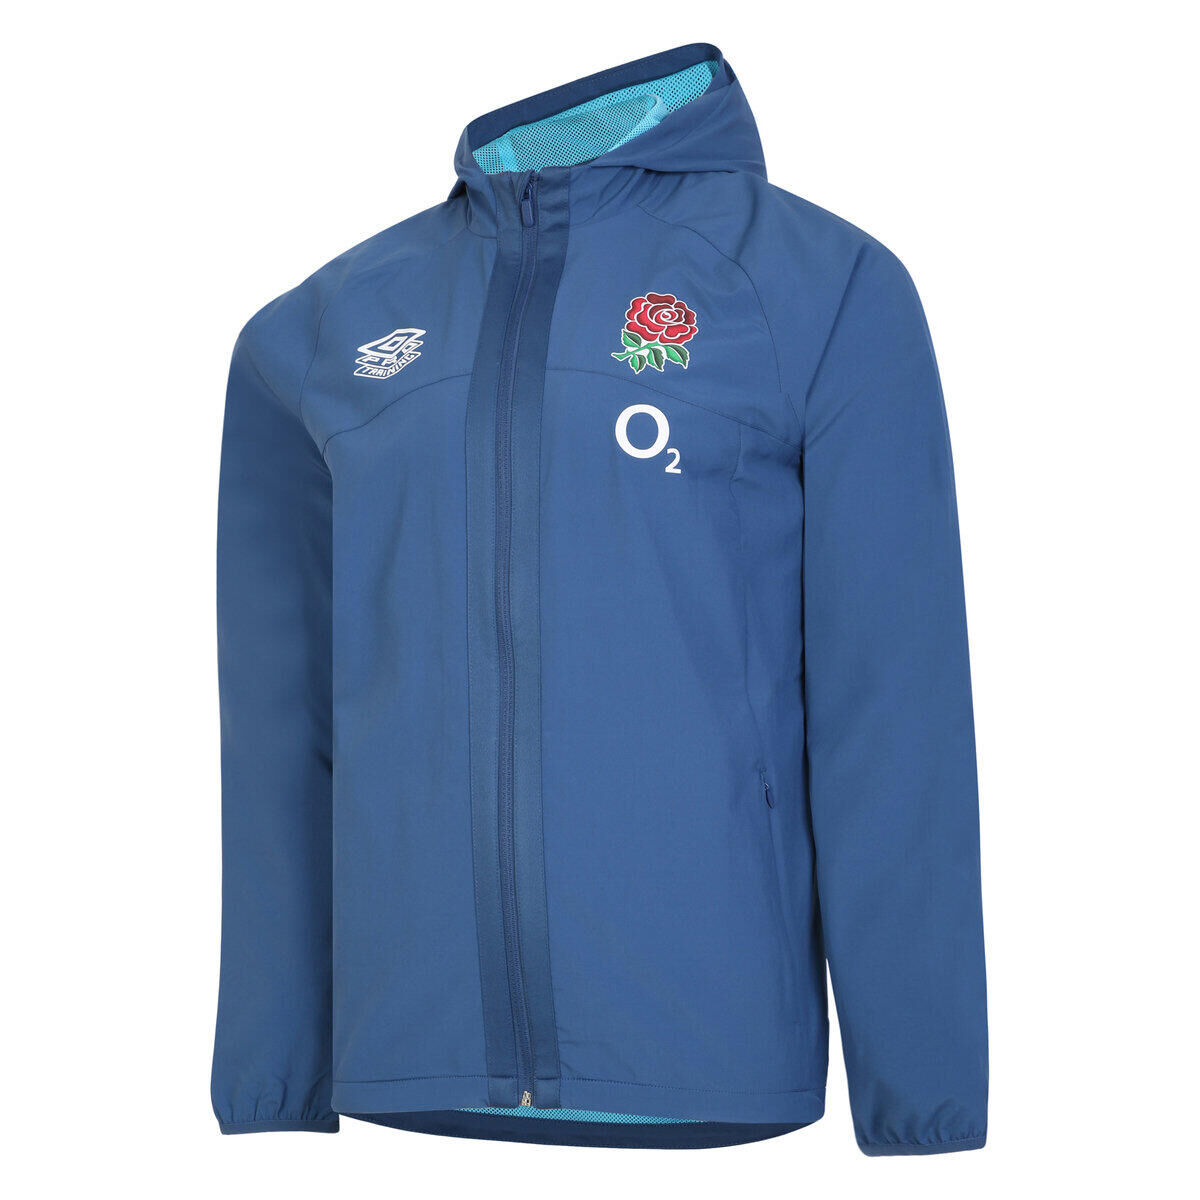 UMBRO England Rugby Mens 22/23 Waterproof Jacket (Ensign Blue/Bachelor Button)